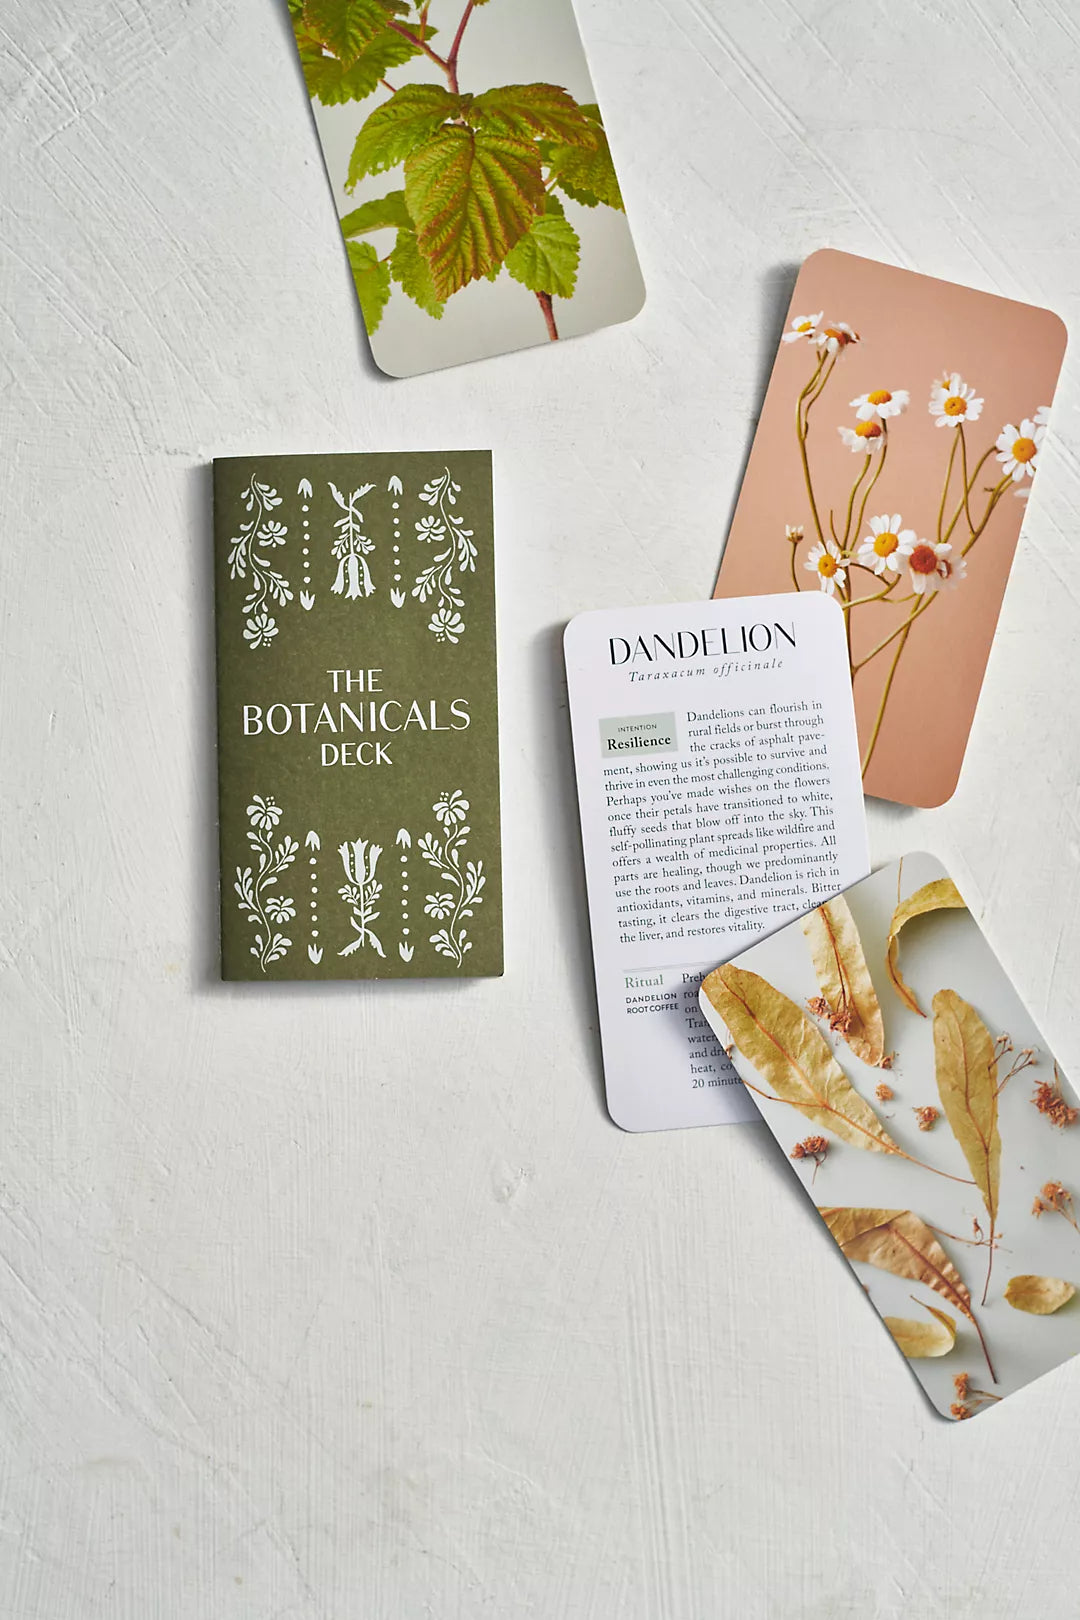 The Botanicals Deck: 70 Plants and Flowers to Enhance Your Life―Plus Herbal Recipes and Rituals